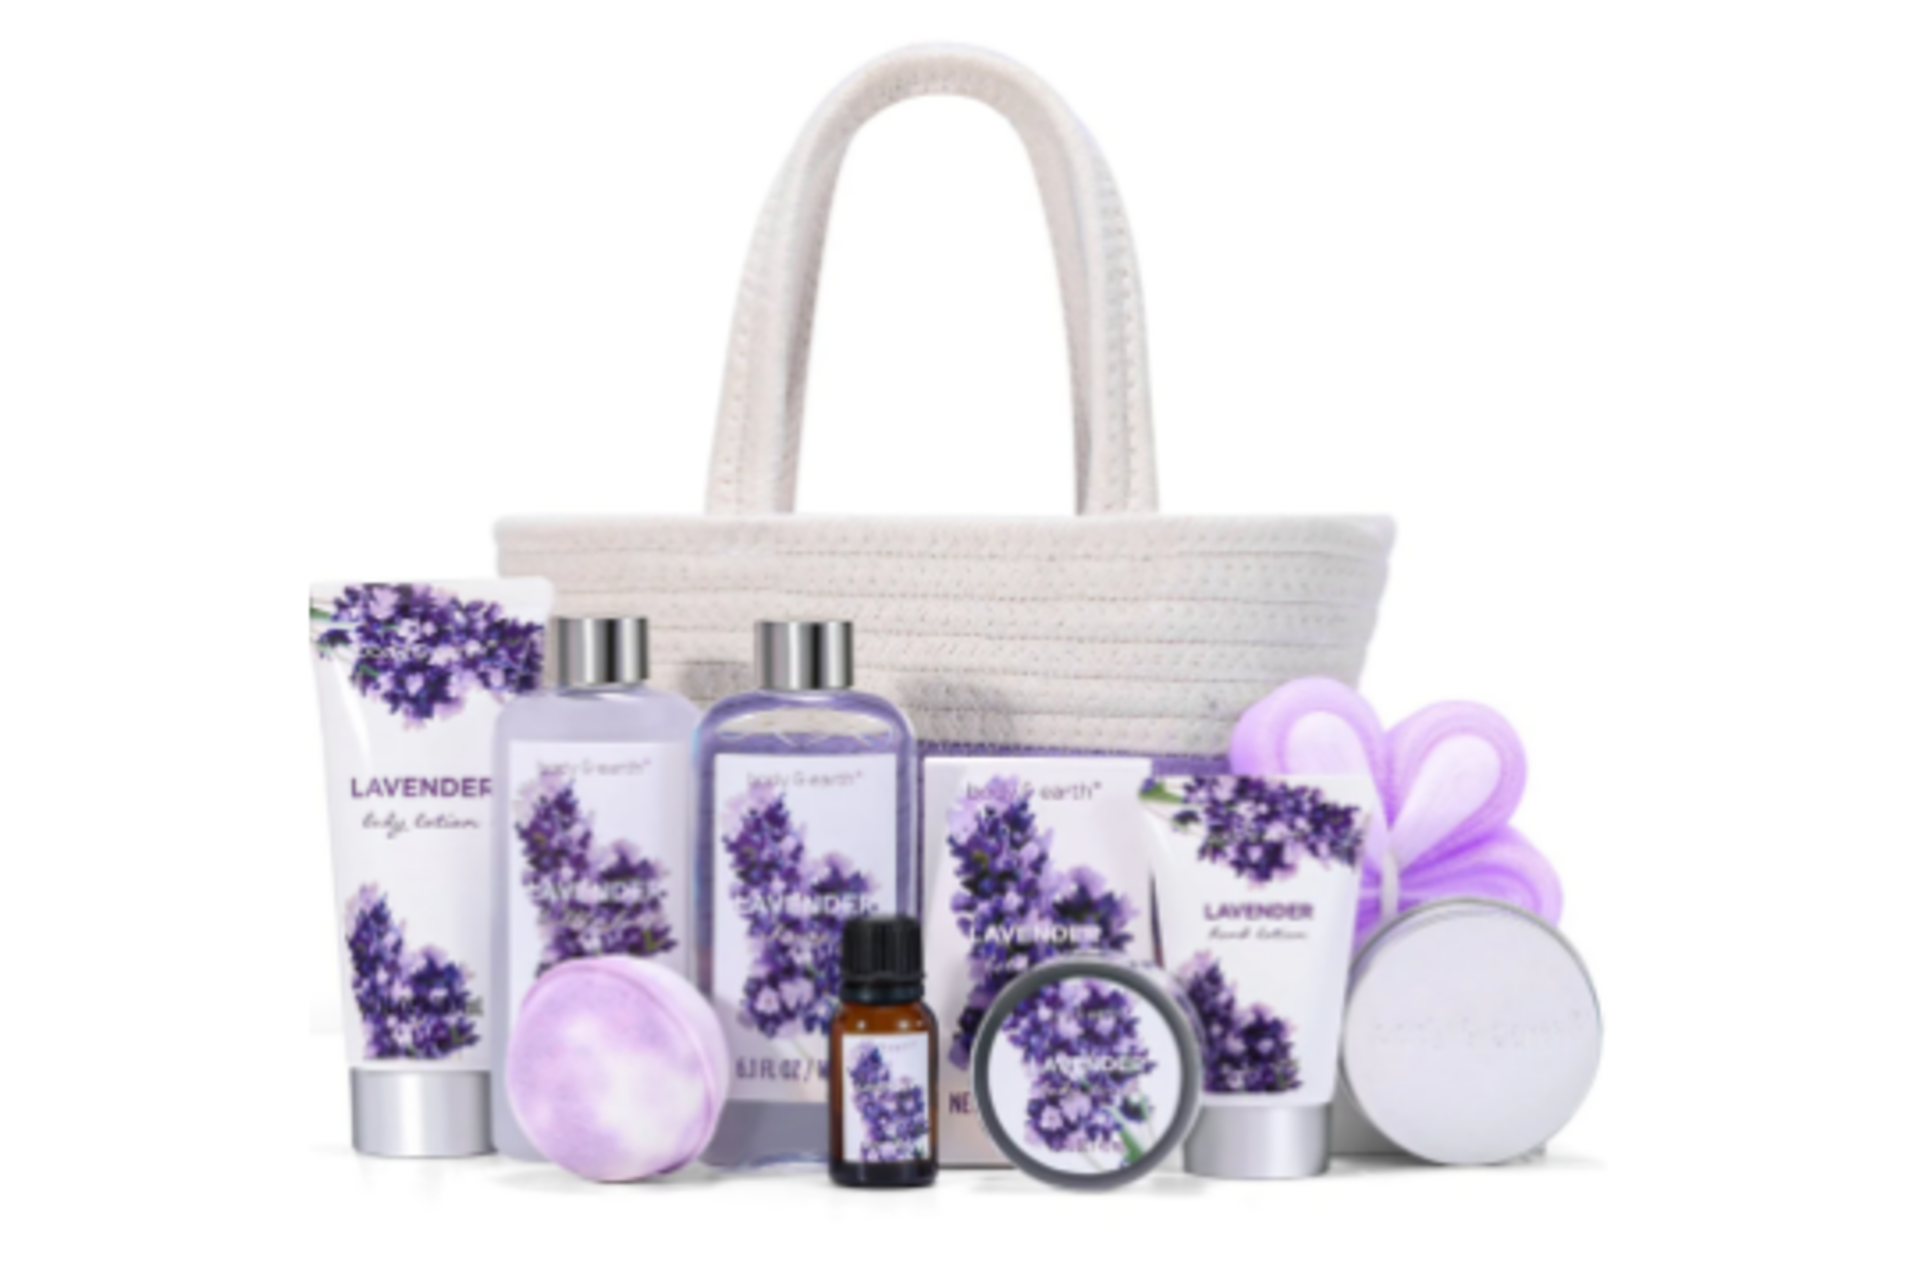 PALLET TO CONTAIN 24 X NEW PACKAGED Body & Earth Lavender Spa Basket Set. (BE-BP-010) Nourishing